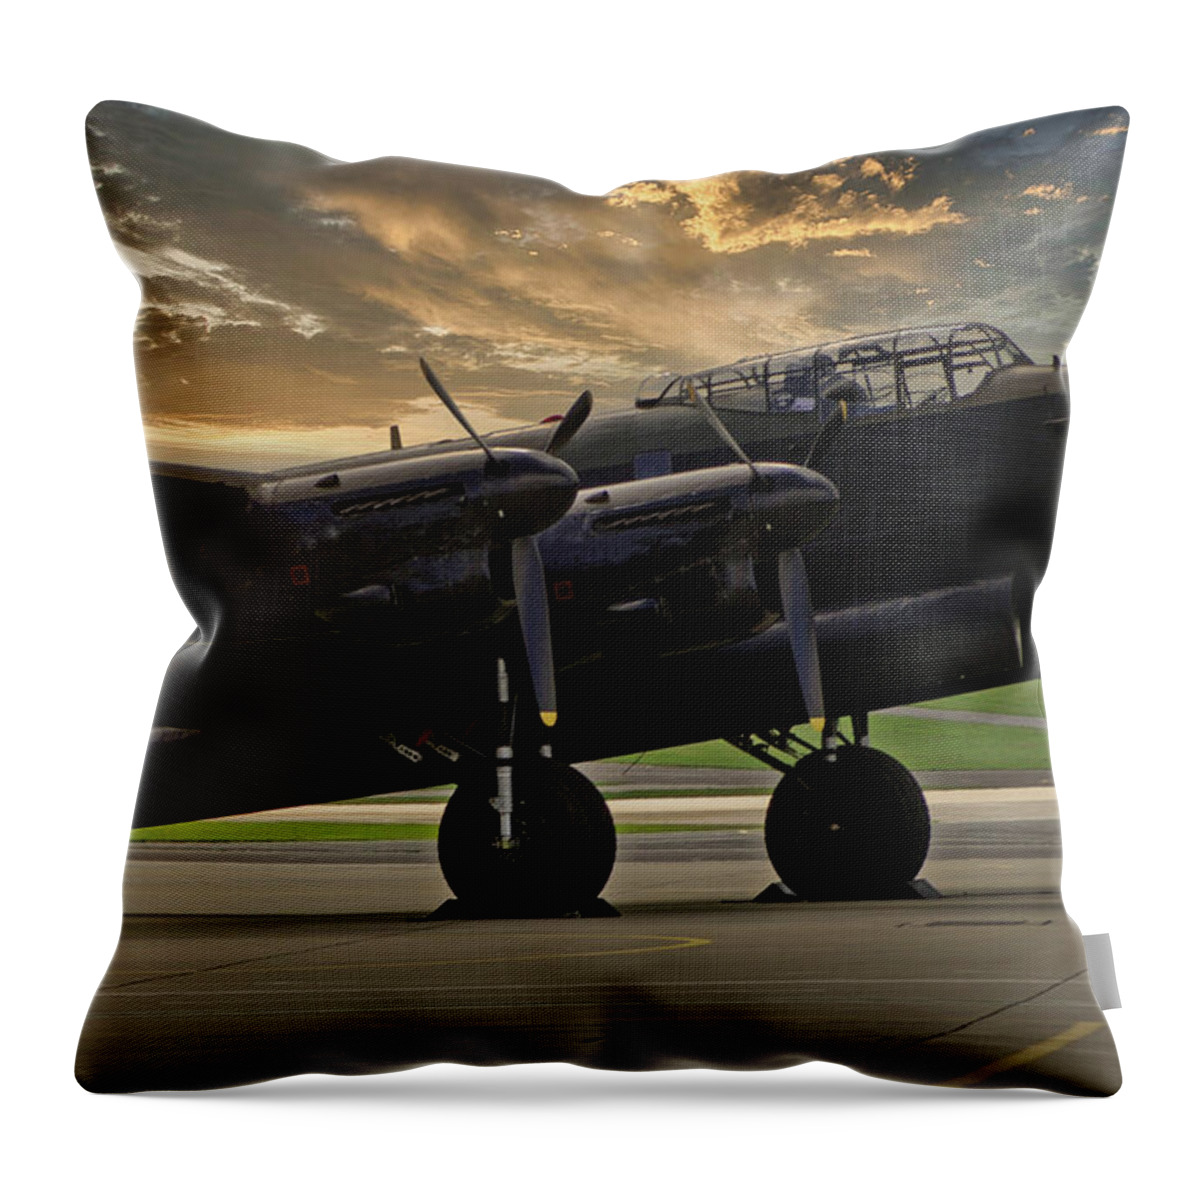  Throw Pillow featuring the photograph Lancaster - Target for Tonight by Chris Smith